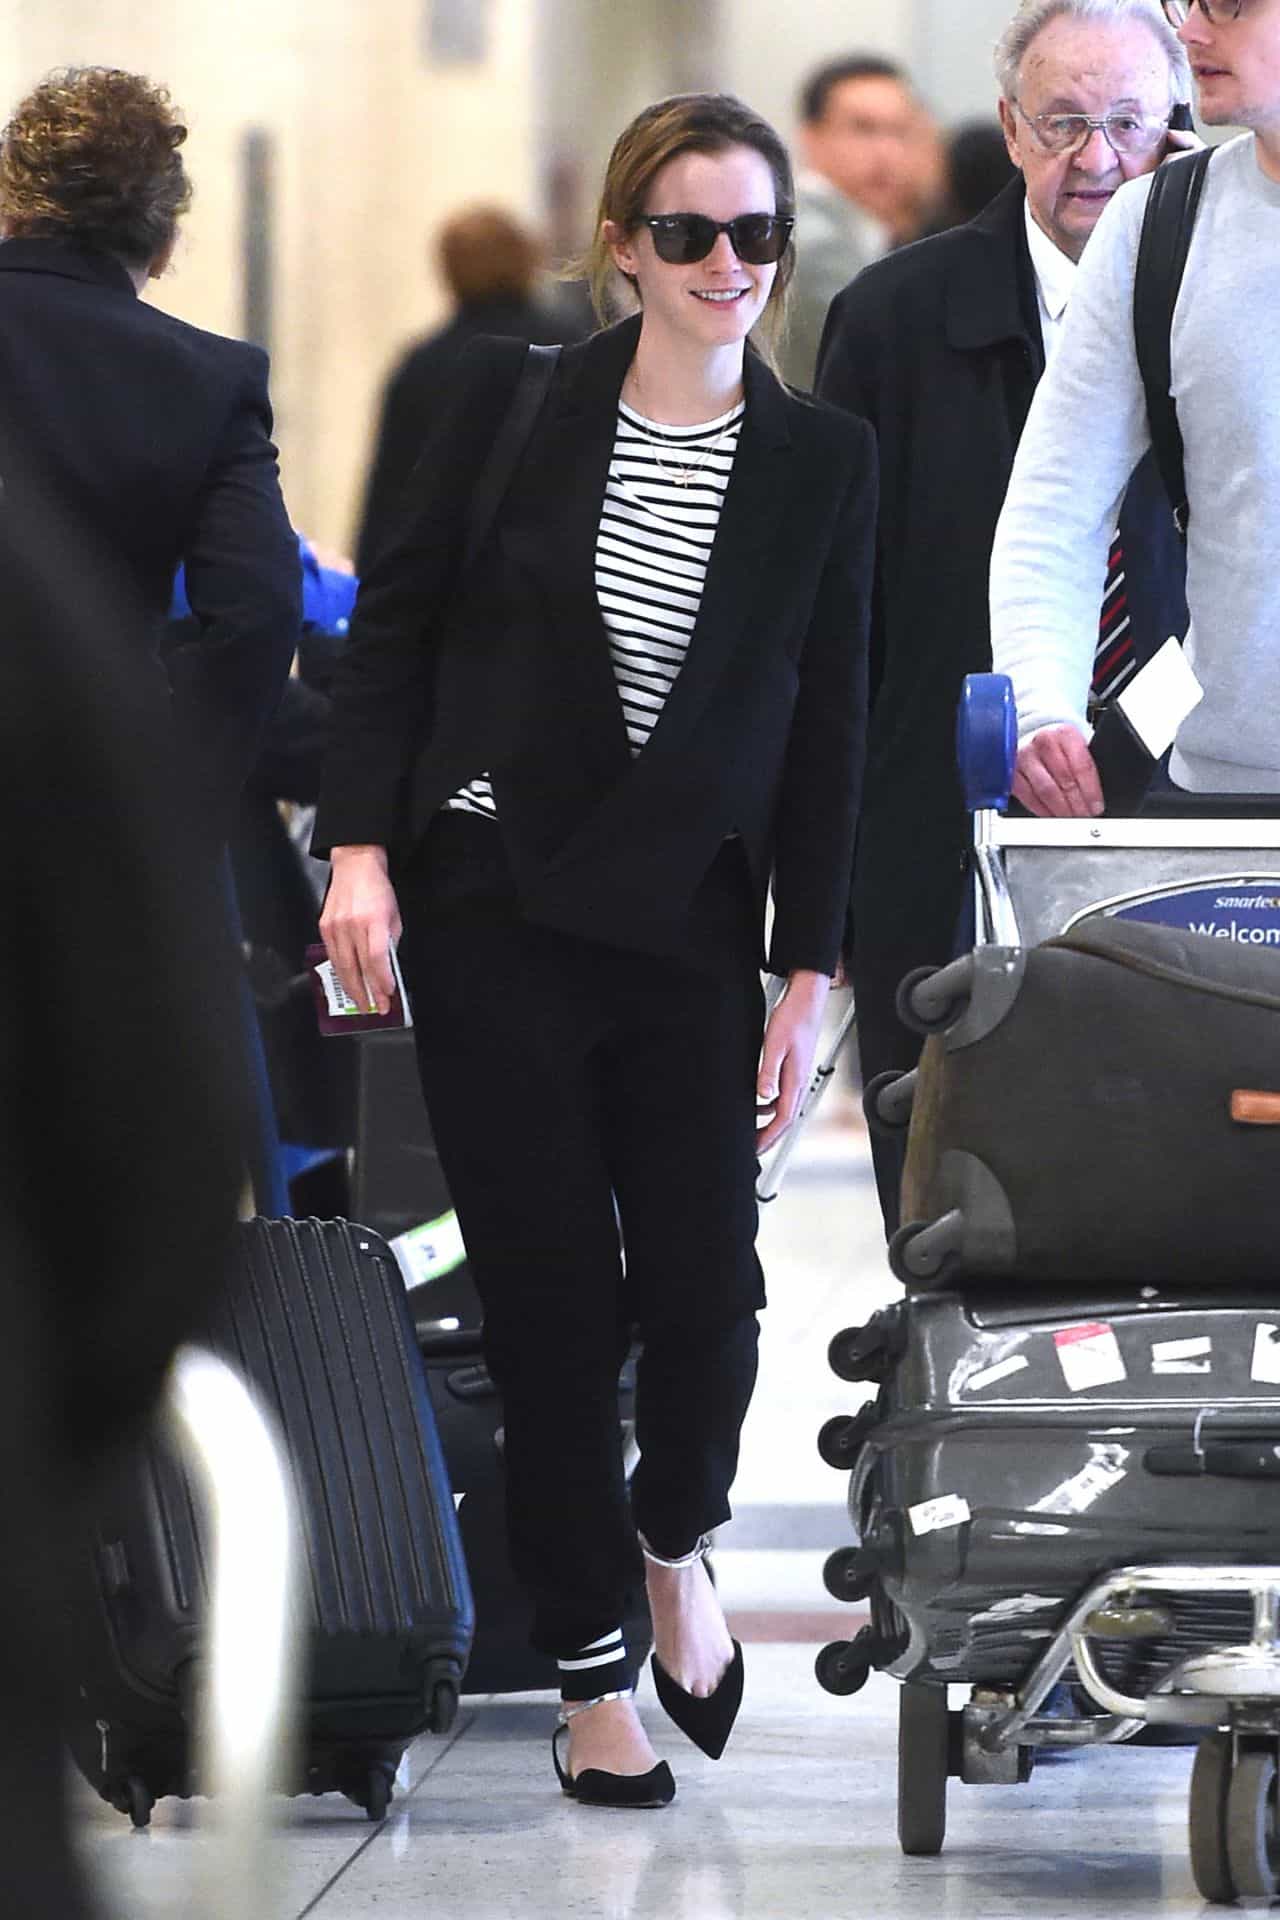 Emma Watson Arrives with Style at JFK Airport in a Striped Top and Blazer